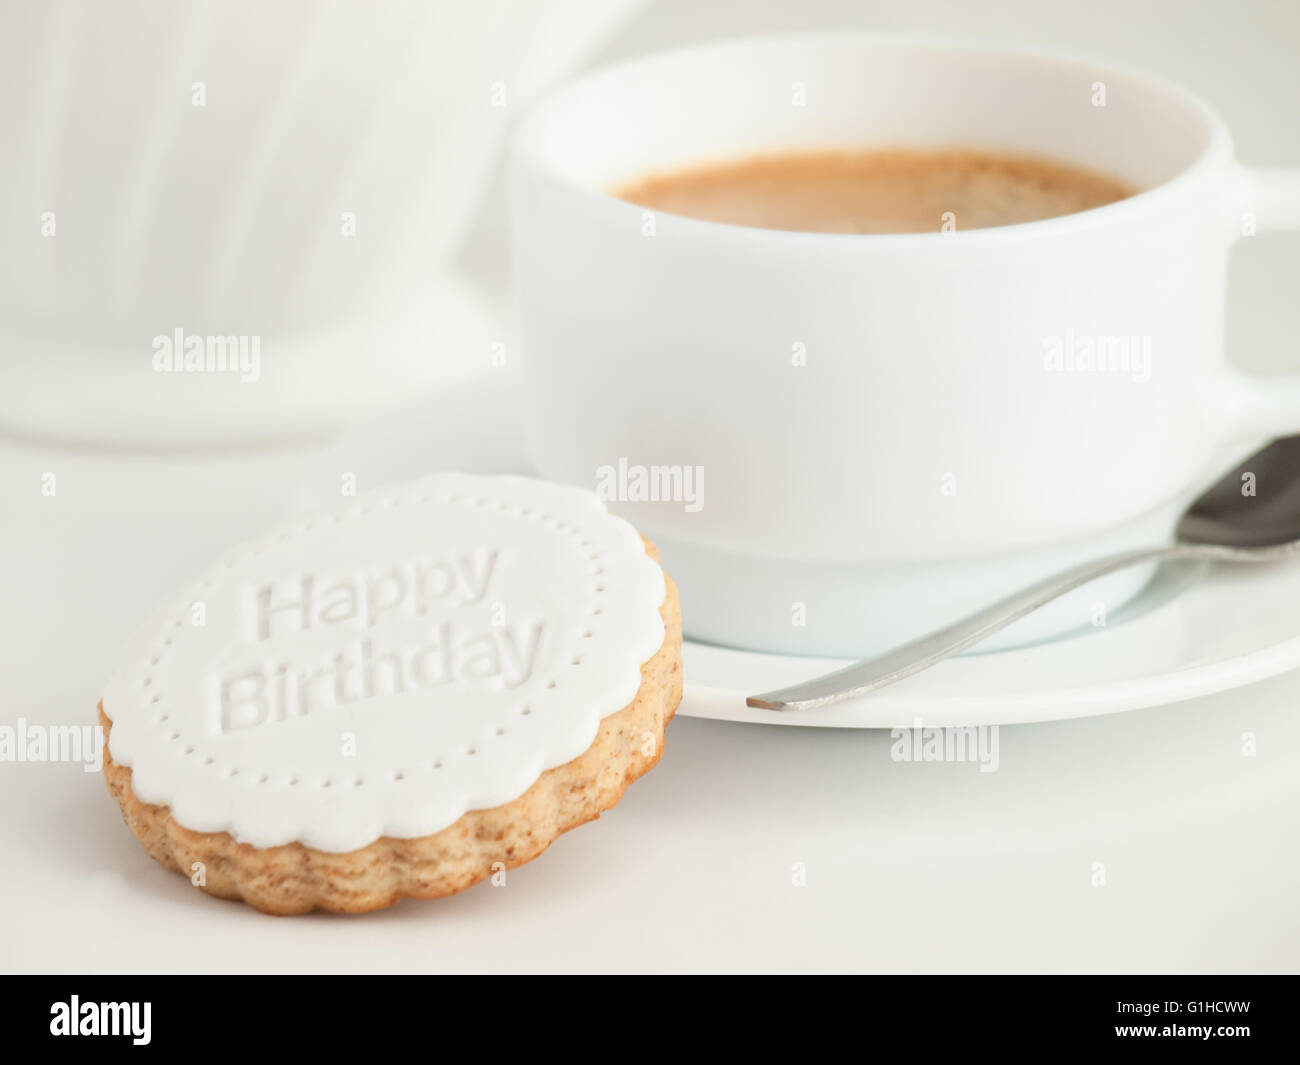 Close up of coffee cup and fondant covered cookie. Happy birthday decoration on top. Stock Photo